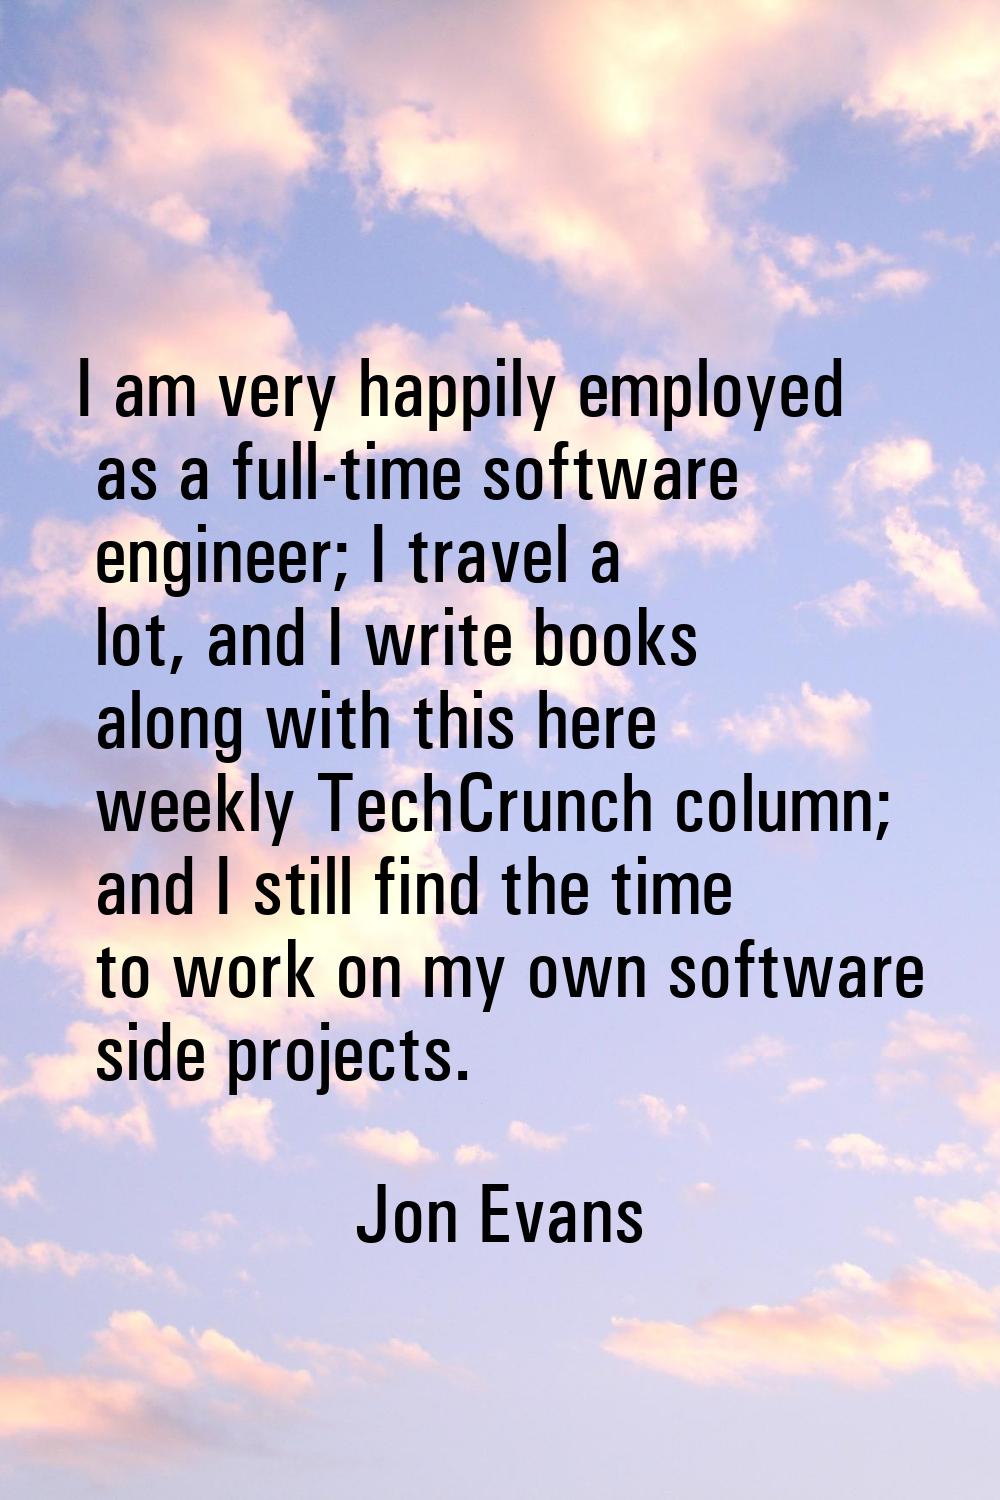 I am very happily employed as a full-time software engineer; I travel a lot, and I write books alon